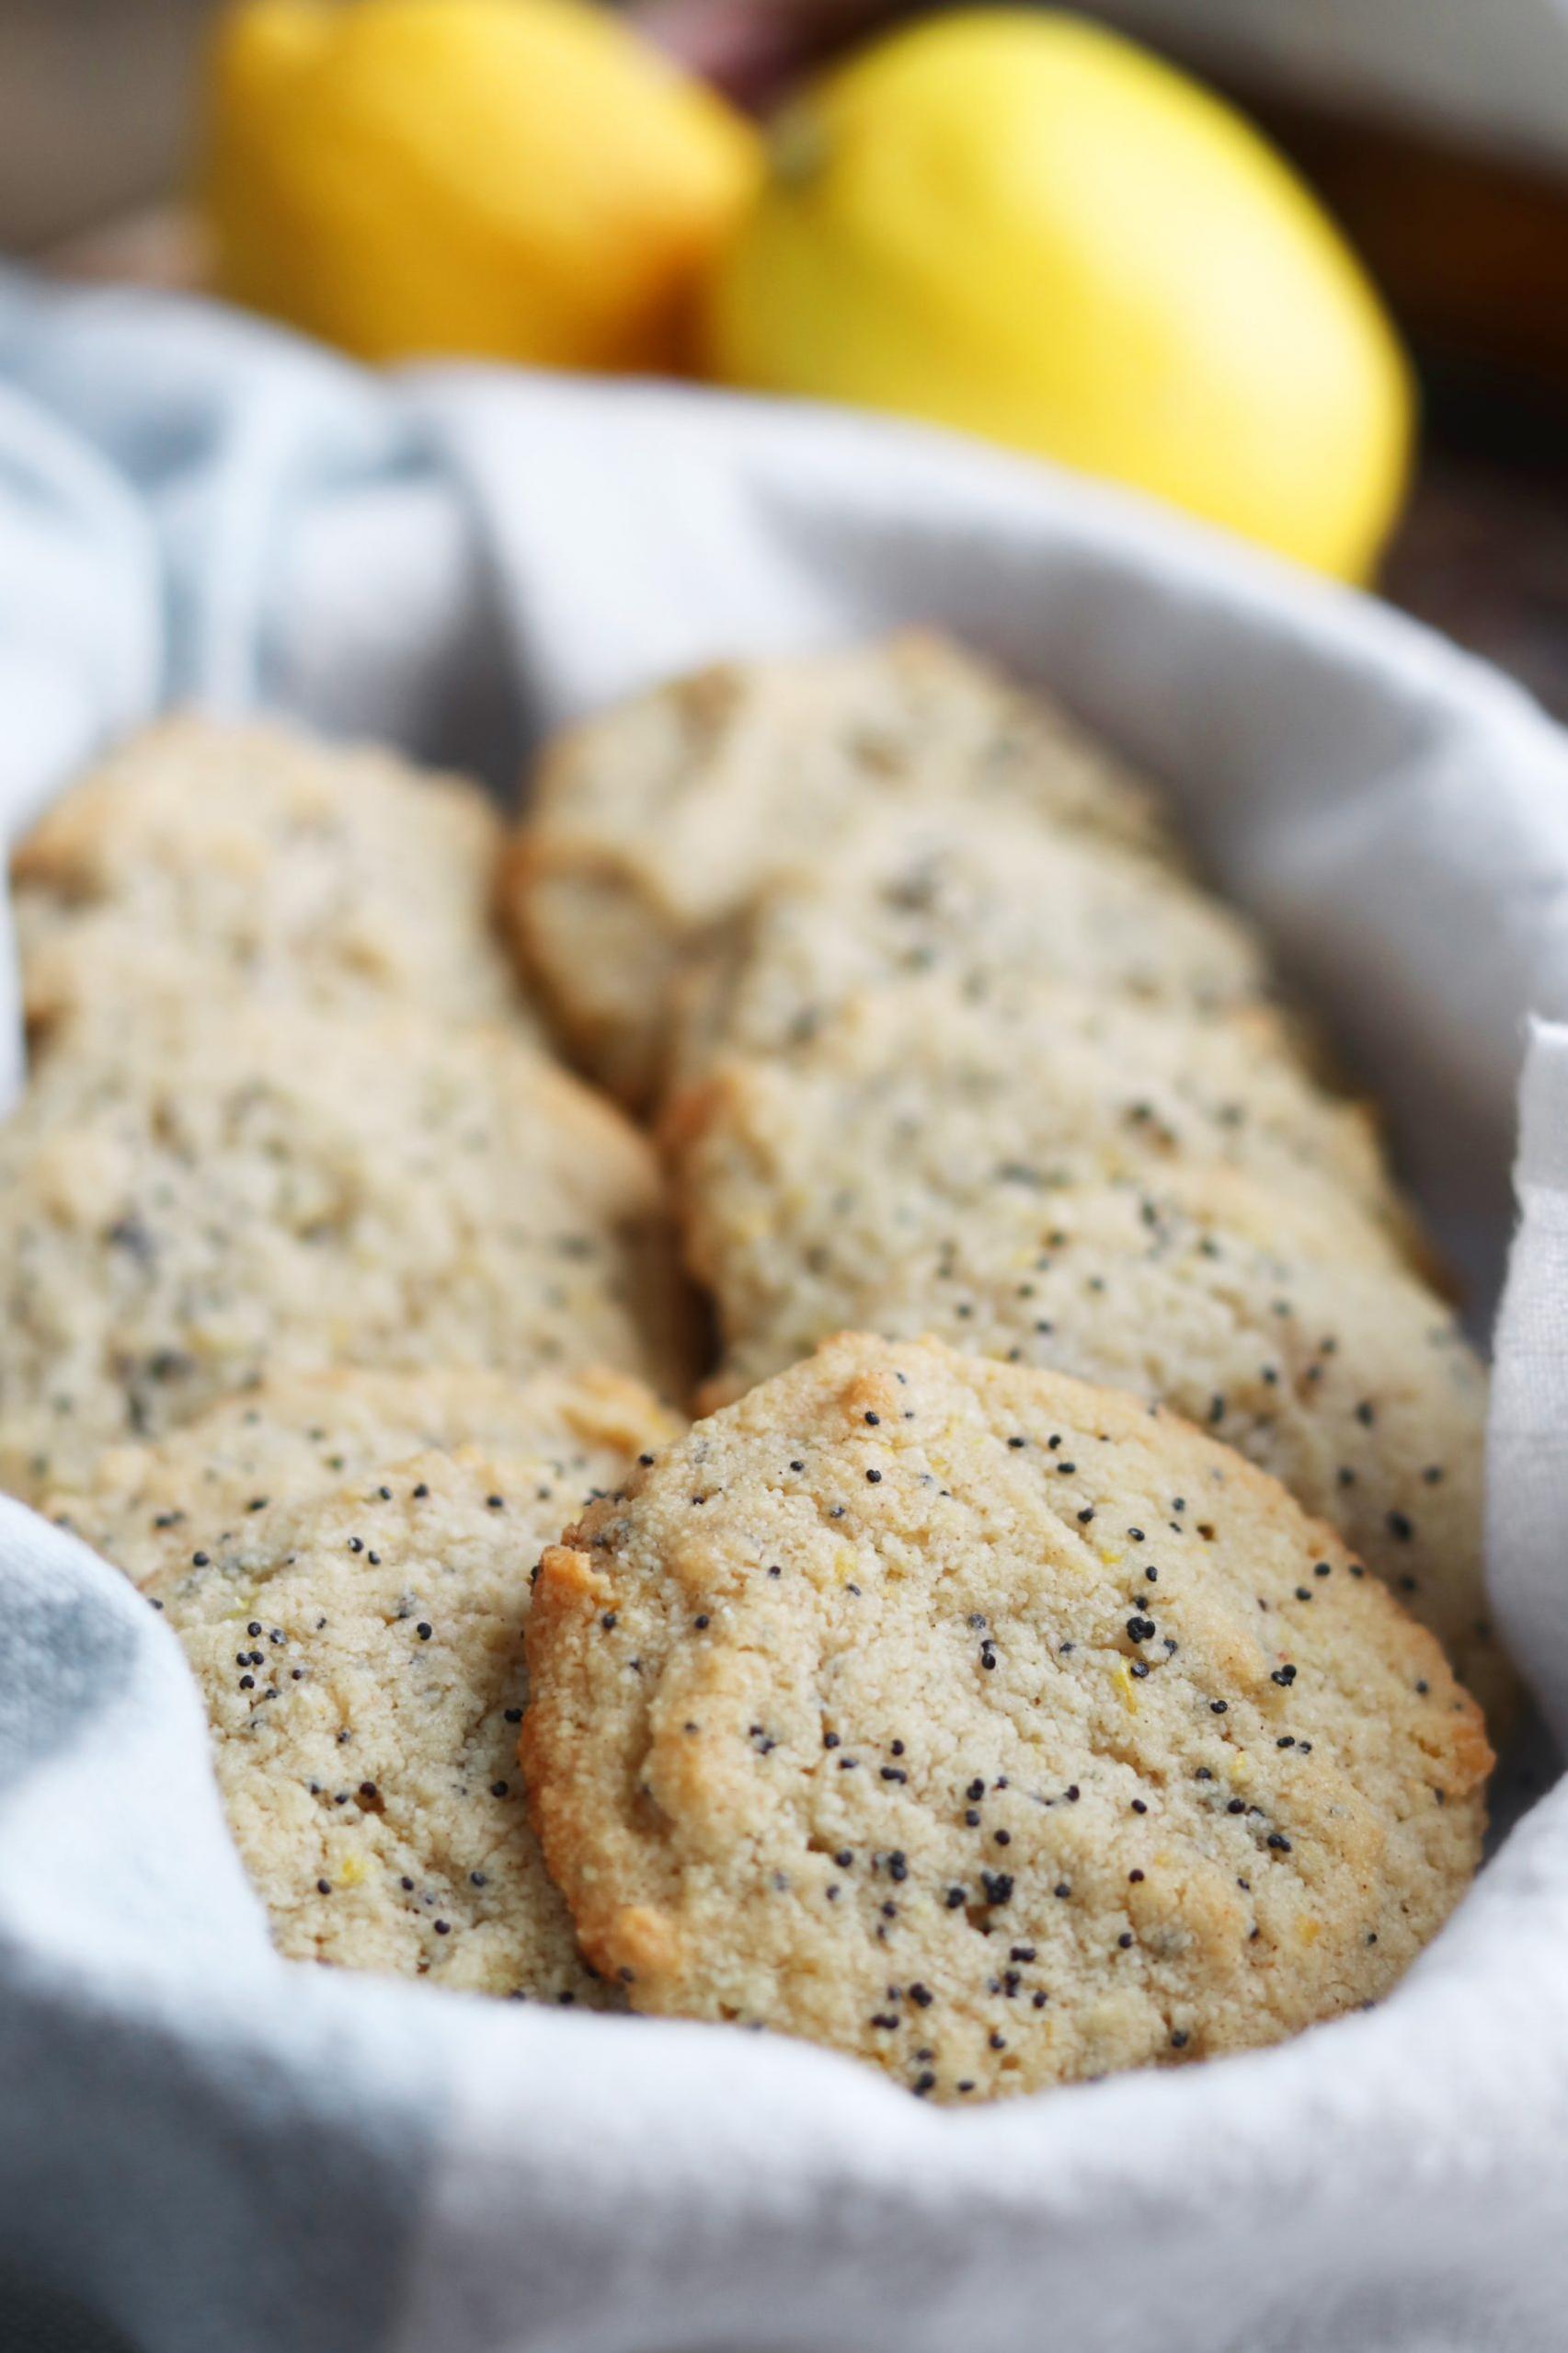  Lemon and poppy-seed: a match made in cookie heaven!